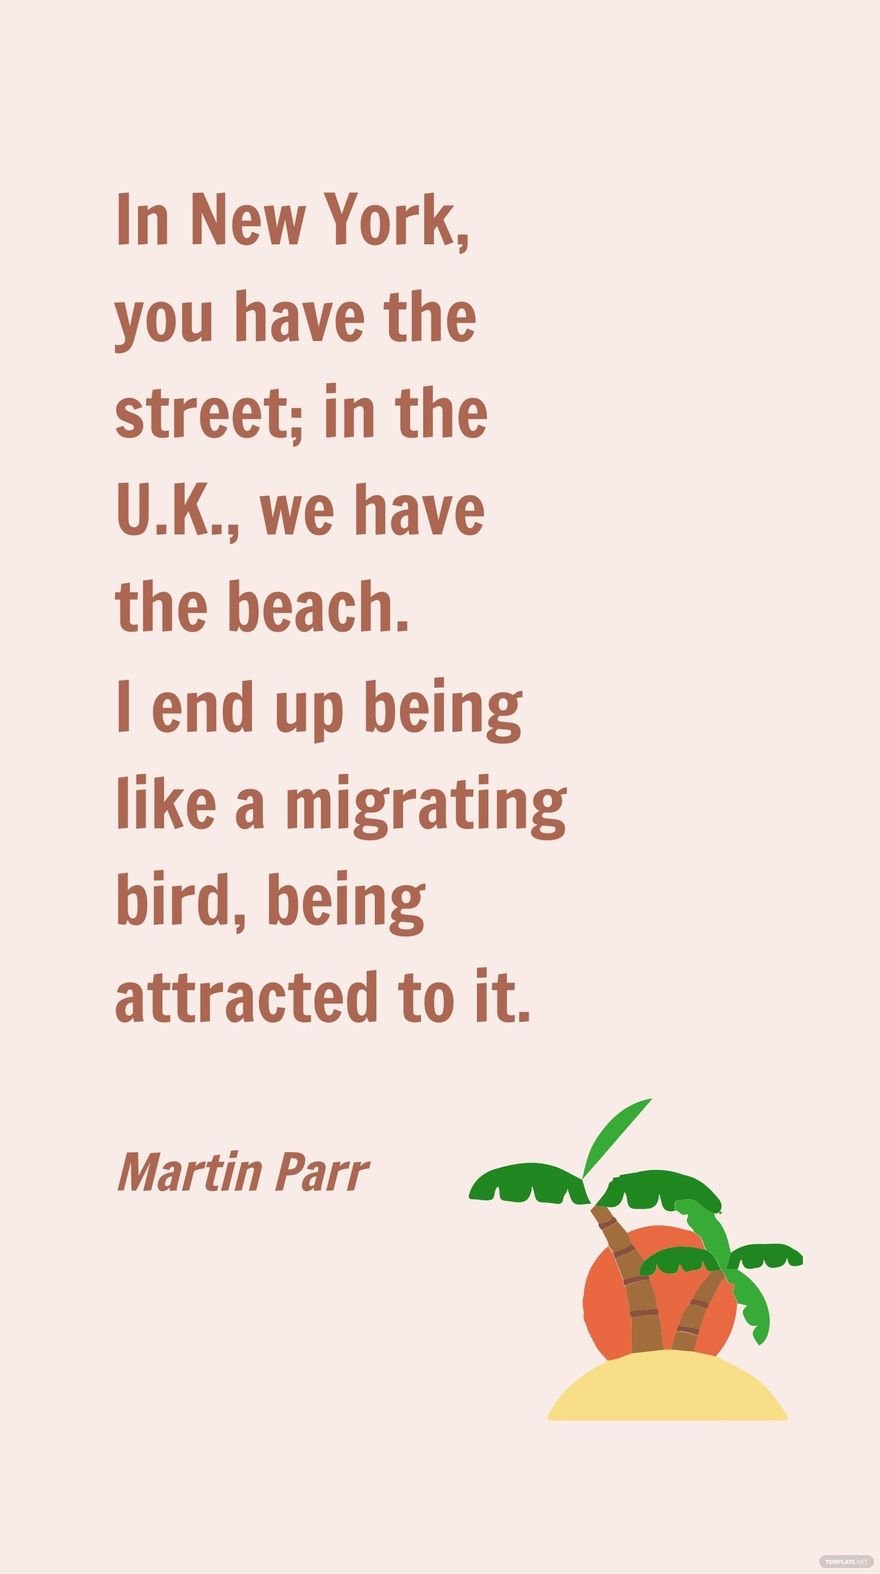 Martin Parr - In New York, you have the street; in the U.K., we have the beach. I end up being like a migrating bird, being attracted to it.